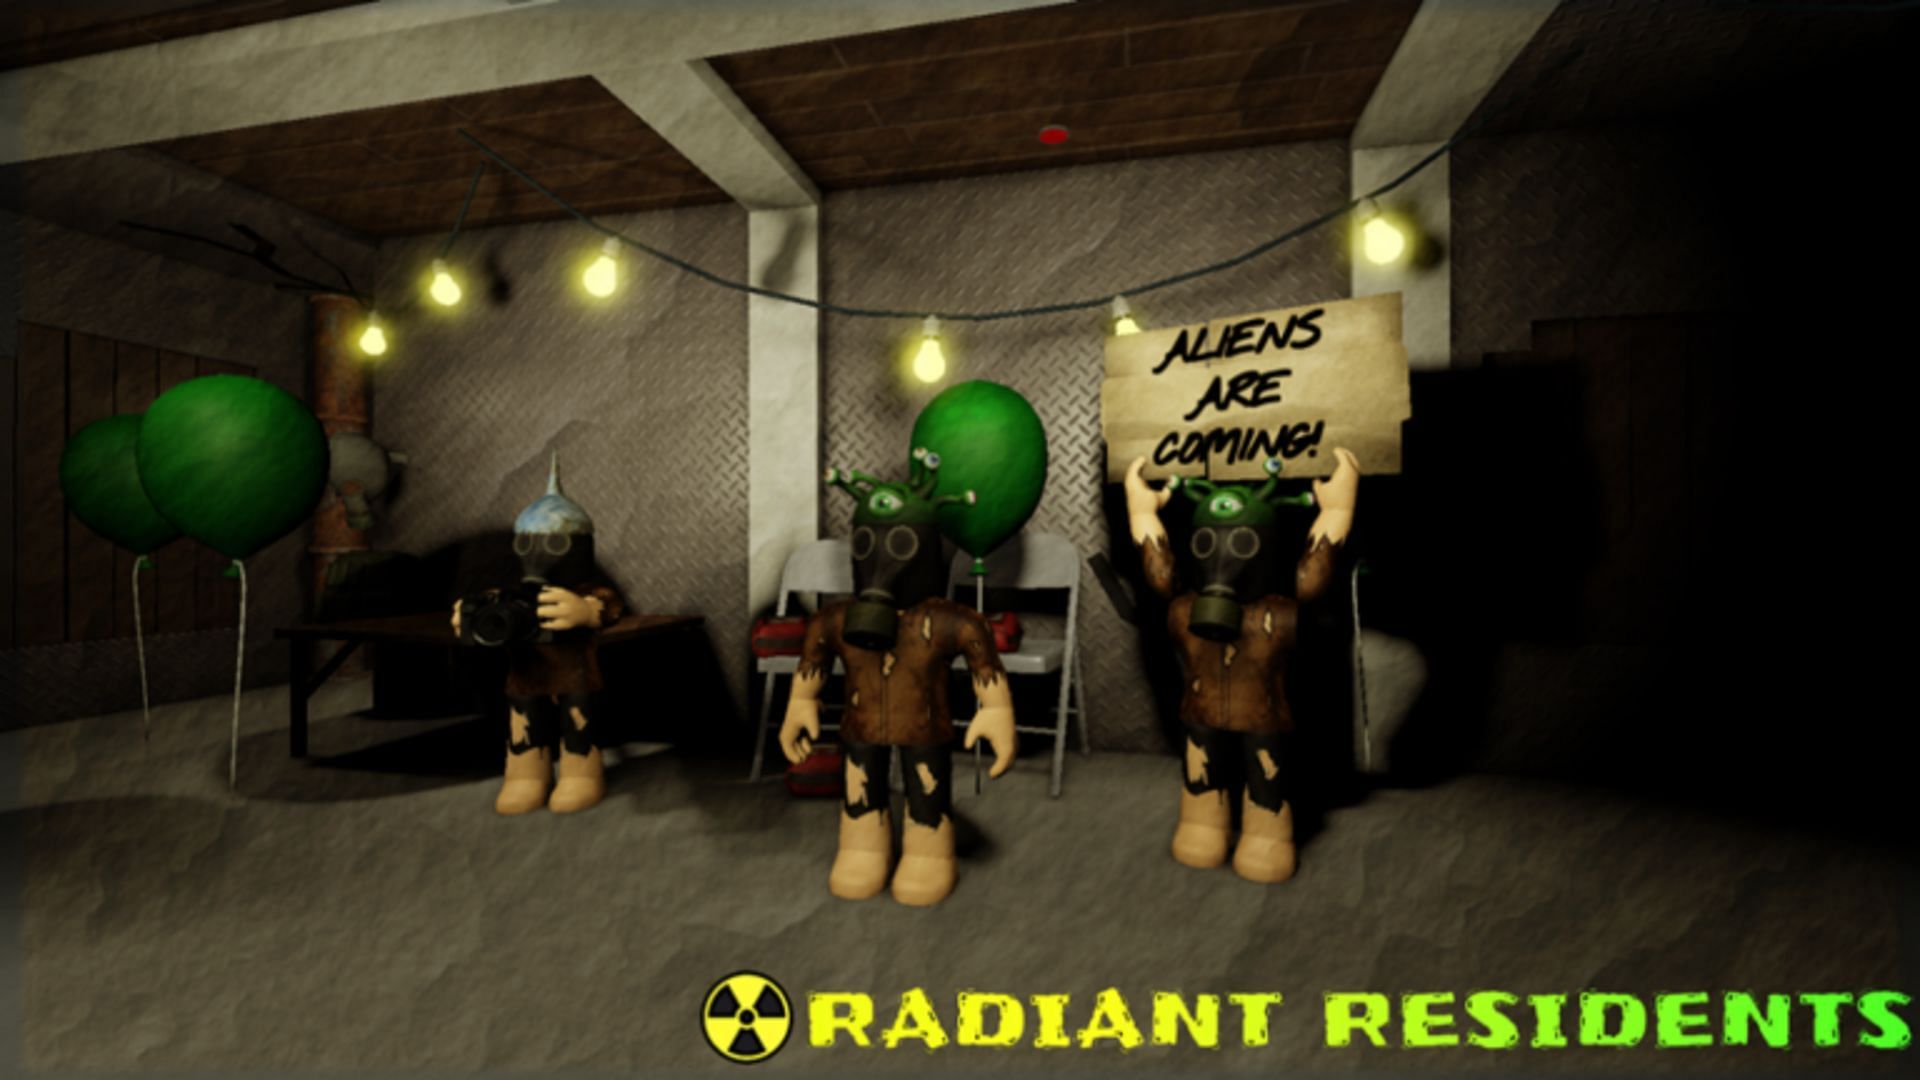 Featured image of Radiant Residents (Image via Roblox)